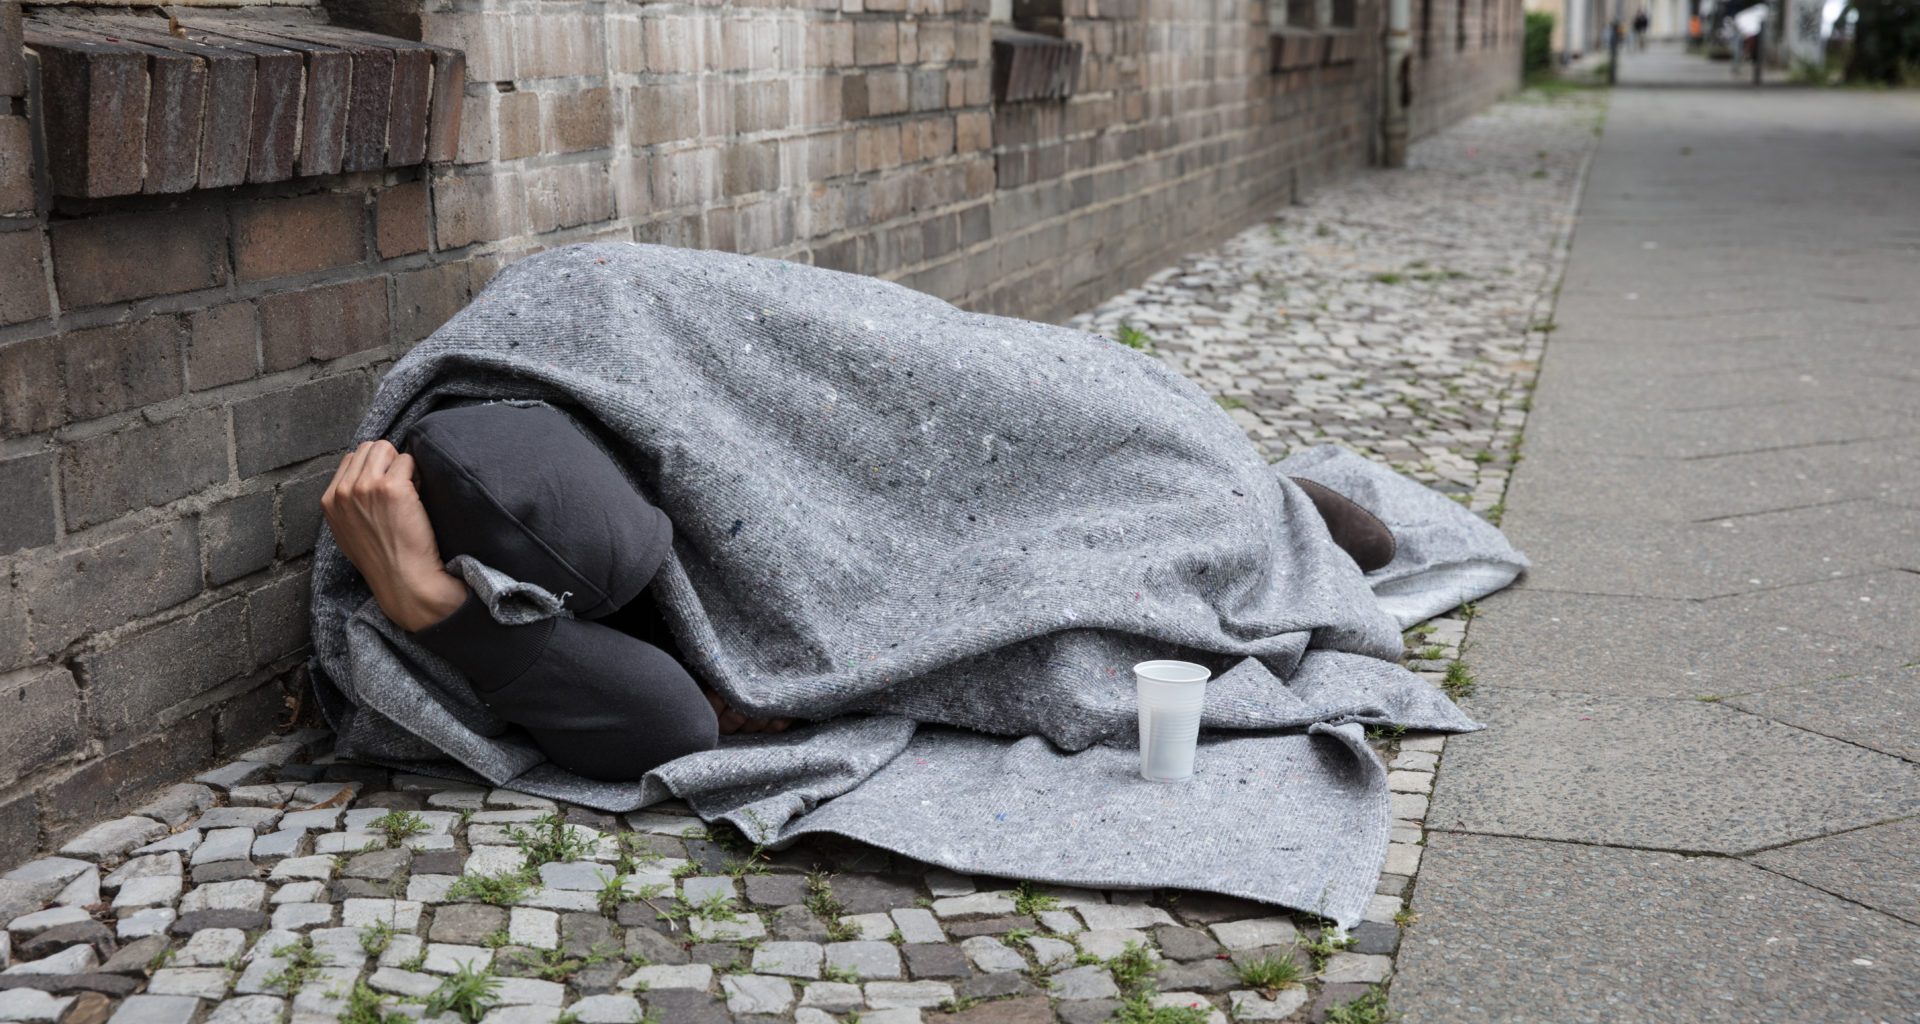 'Shocking' figures show half of record number of homeless deaths related to drugs 7